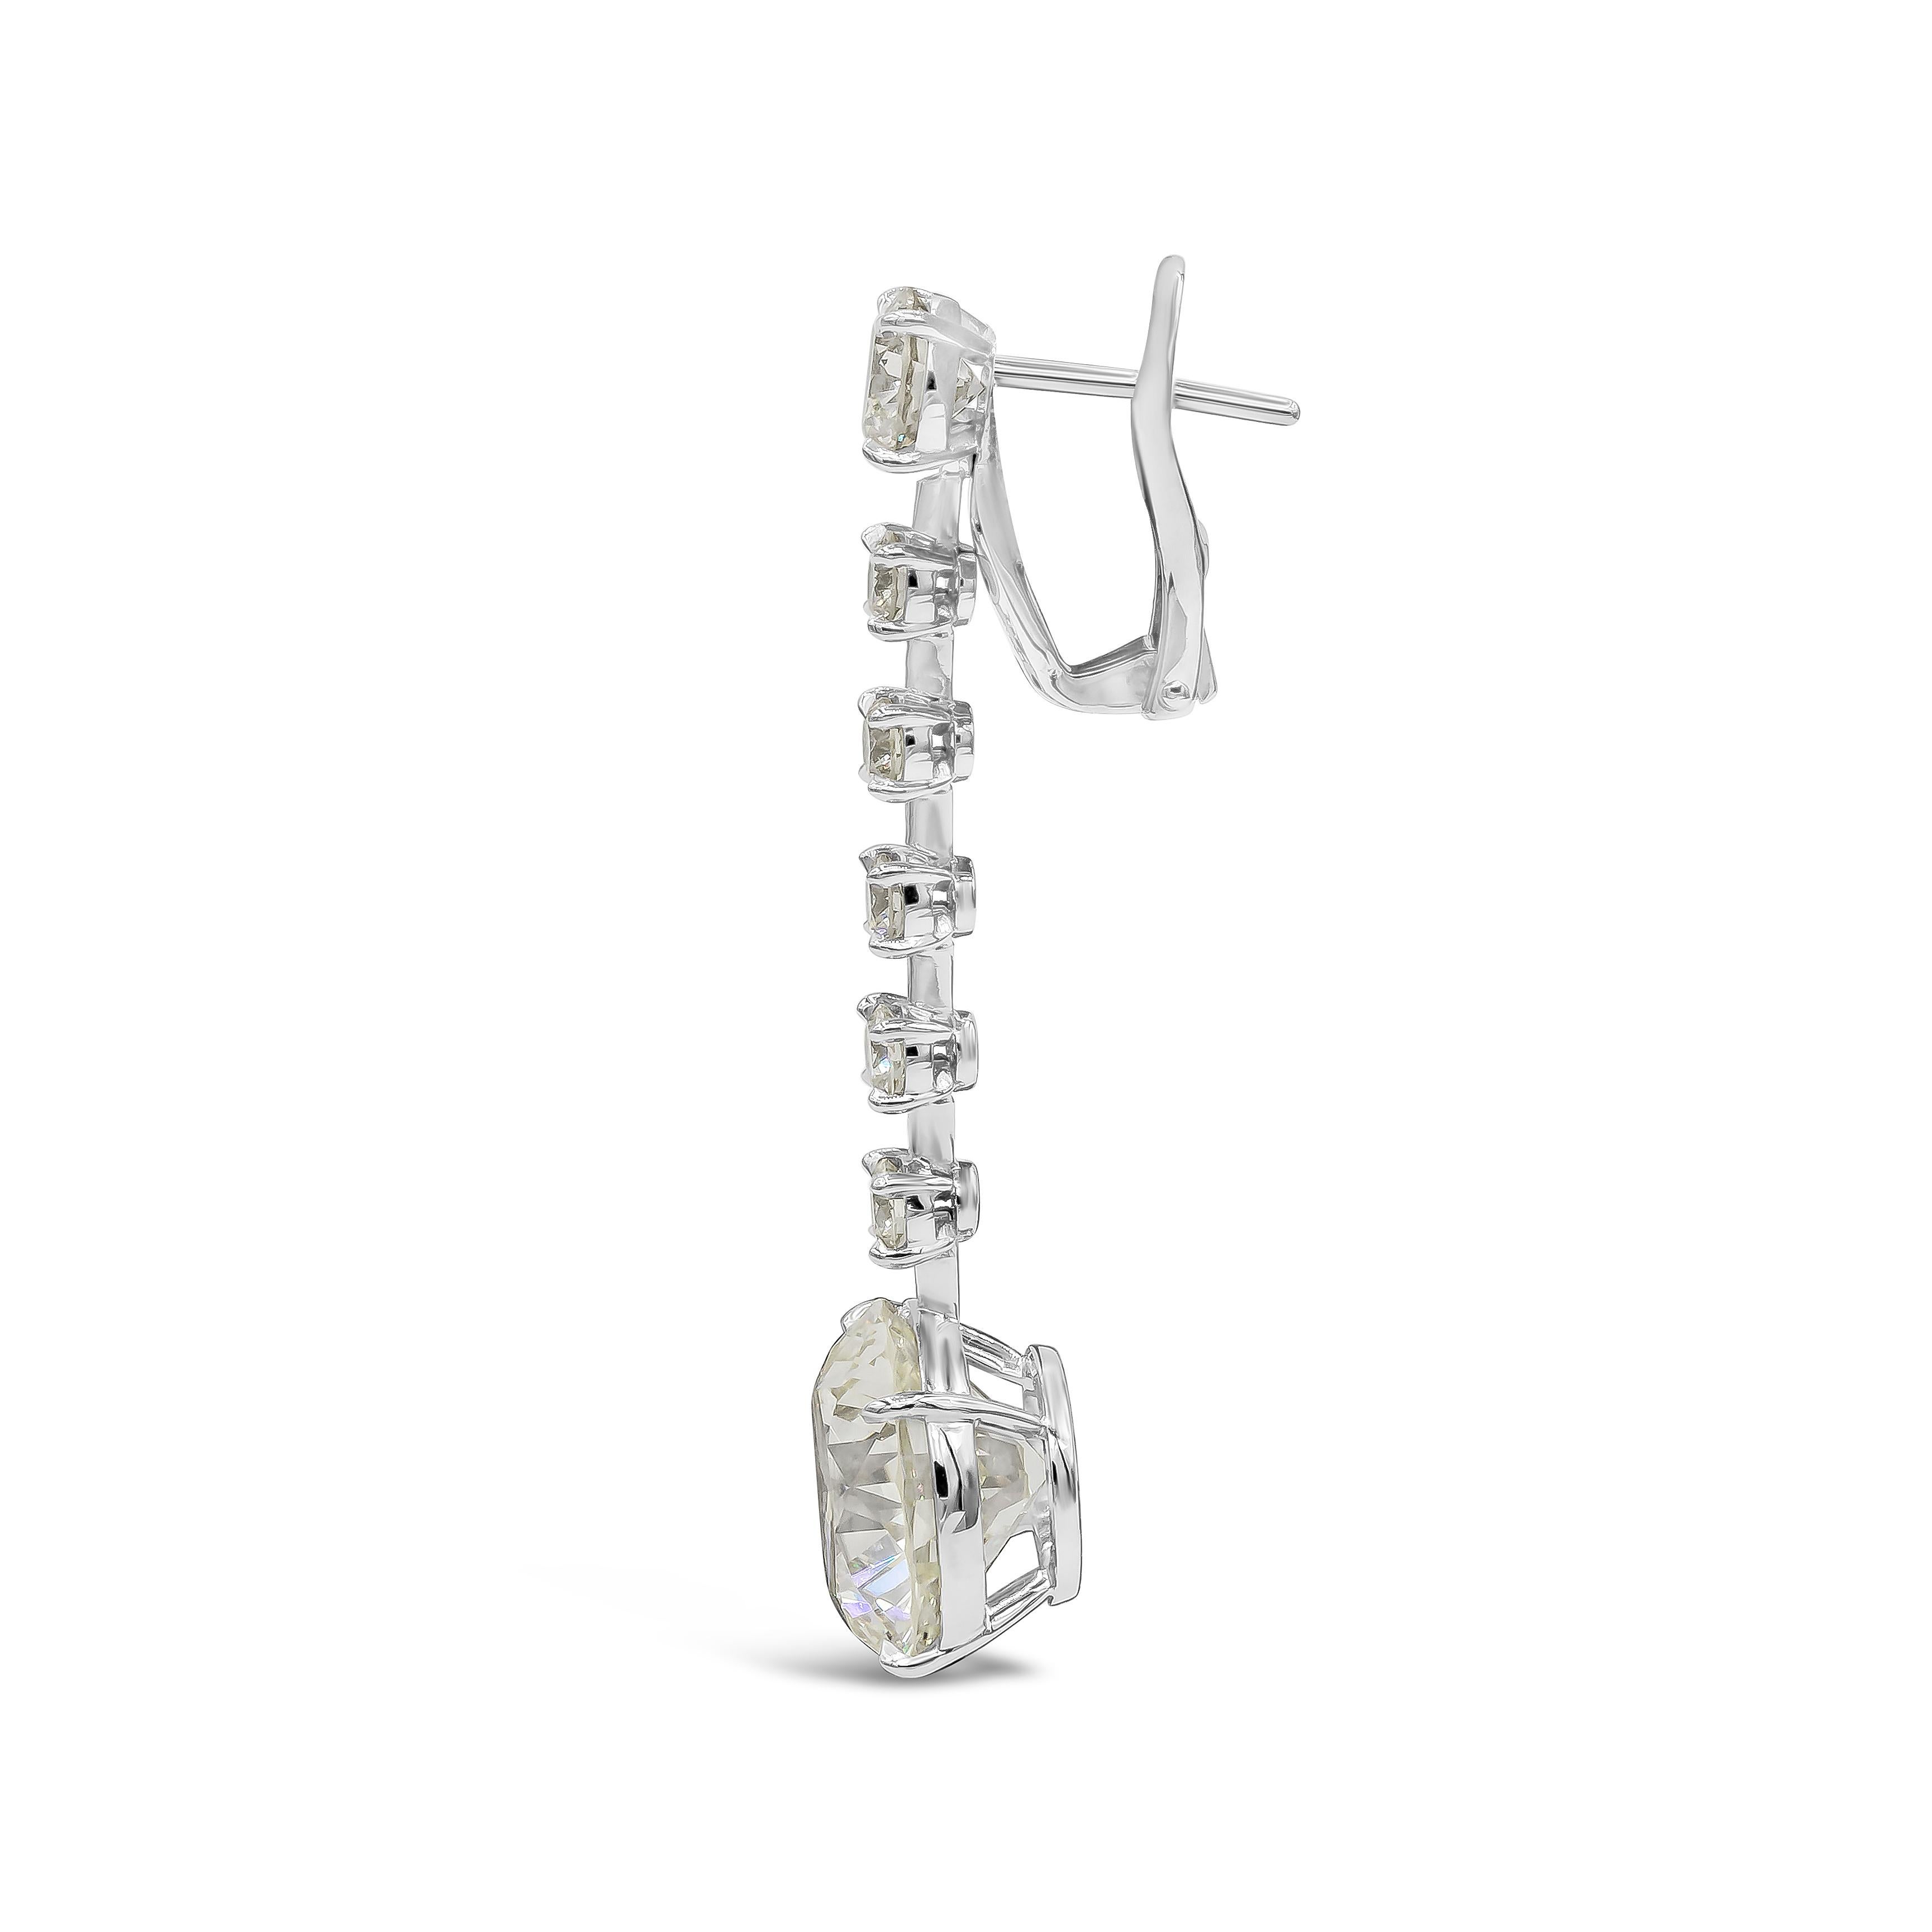 Elegant and well crafted dangle earrings showcasing 17.68 carats total round brilliant diamonds, N-O color, VS1 in clarity, suspended on a row of 6 round diamonds on each pair, weighing 3.40 carats total. Omega clip with collapsible post. Made with